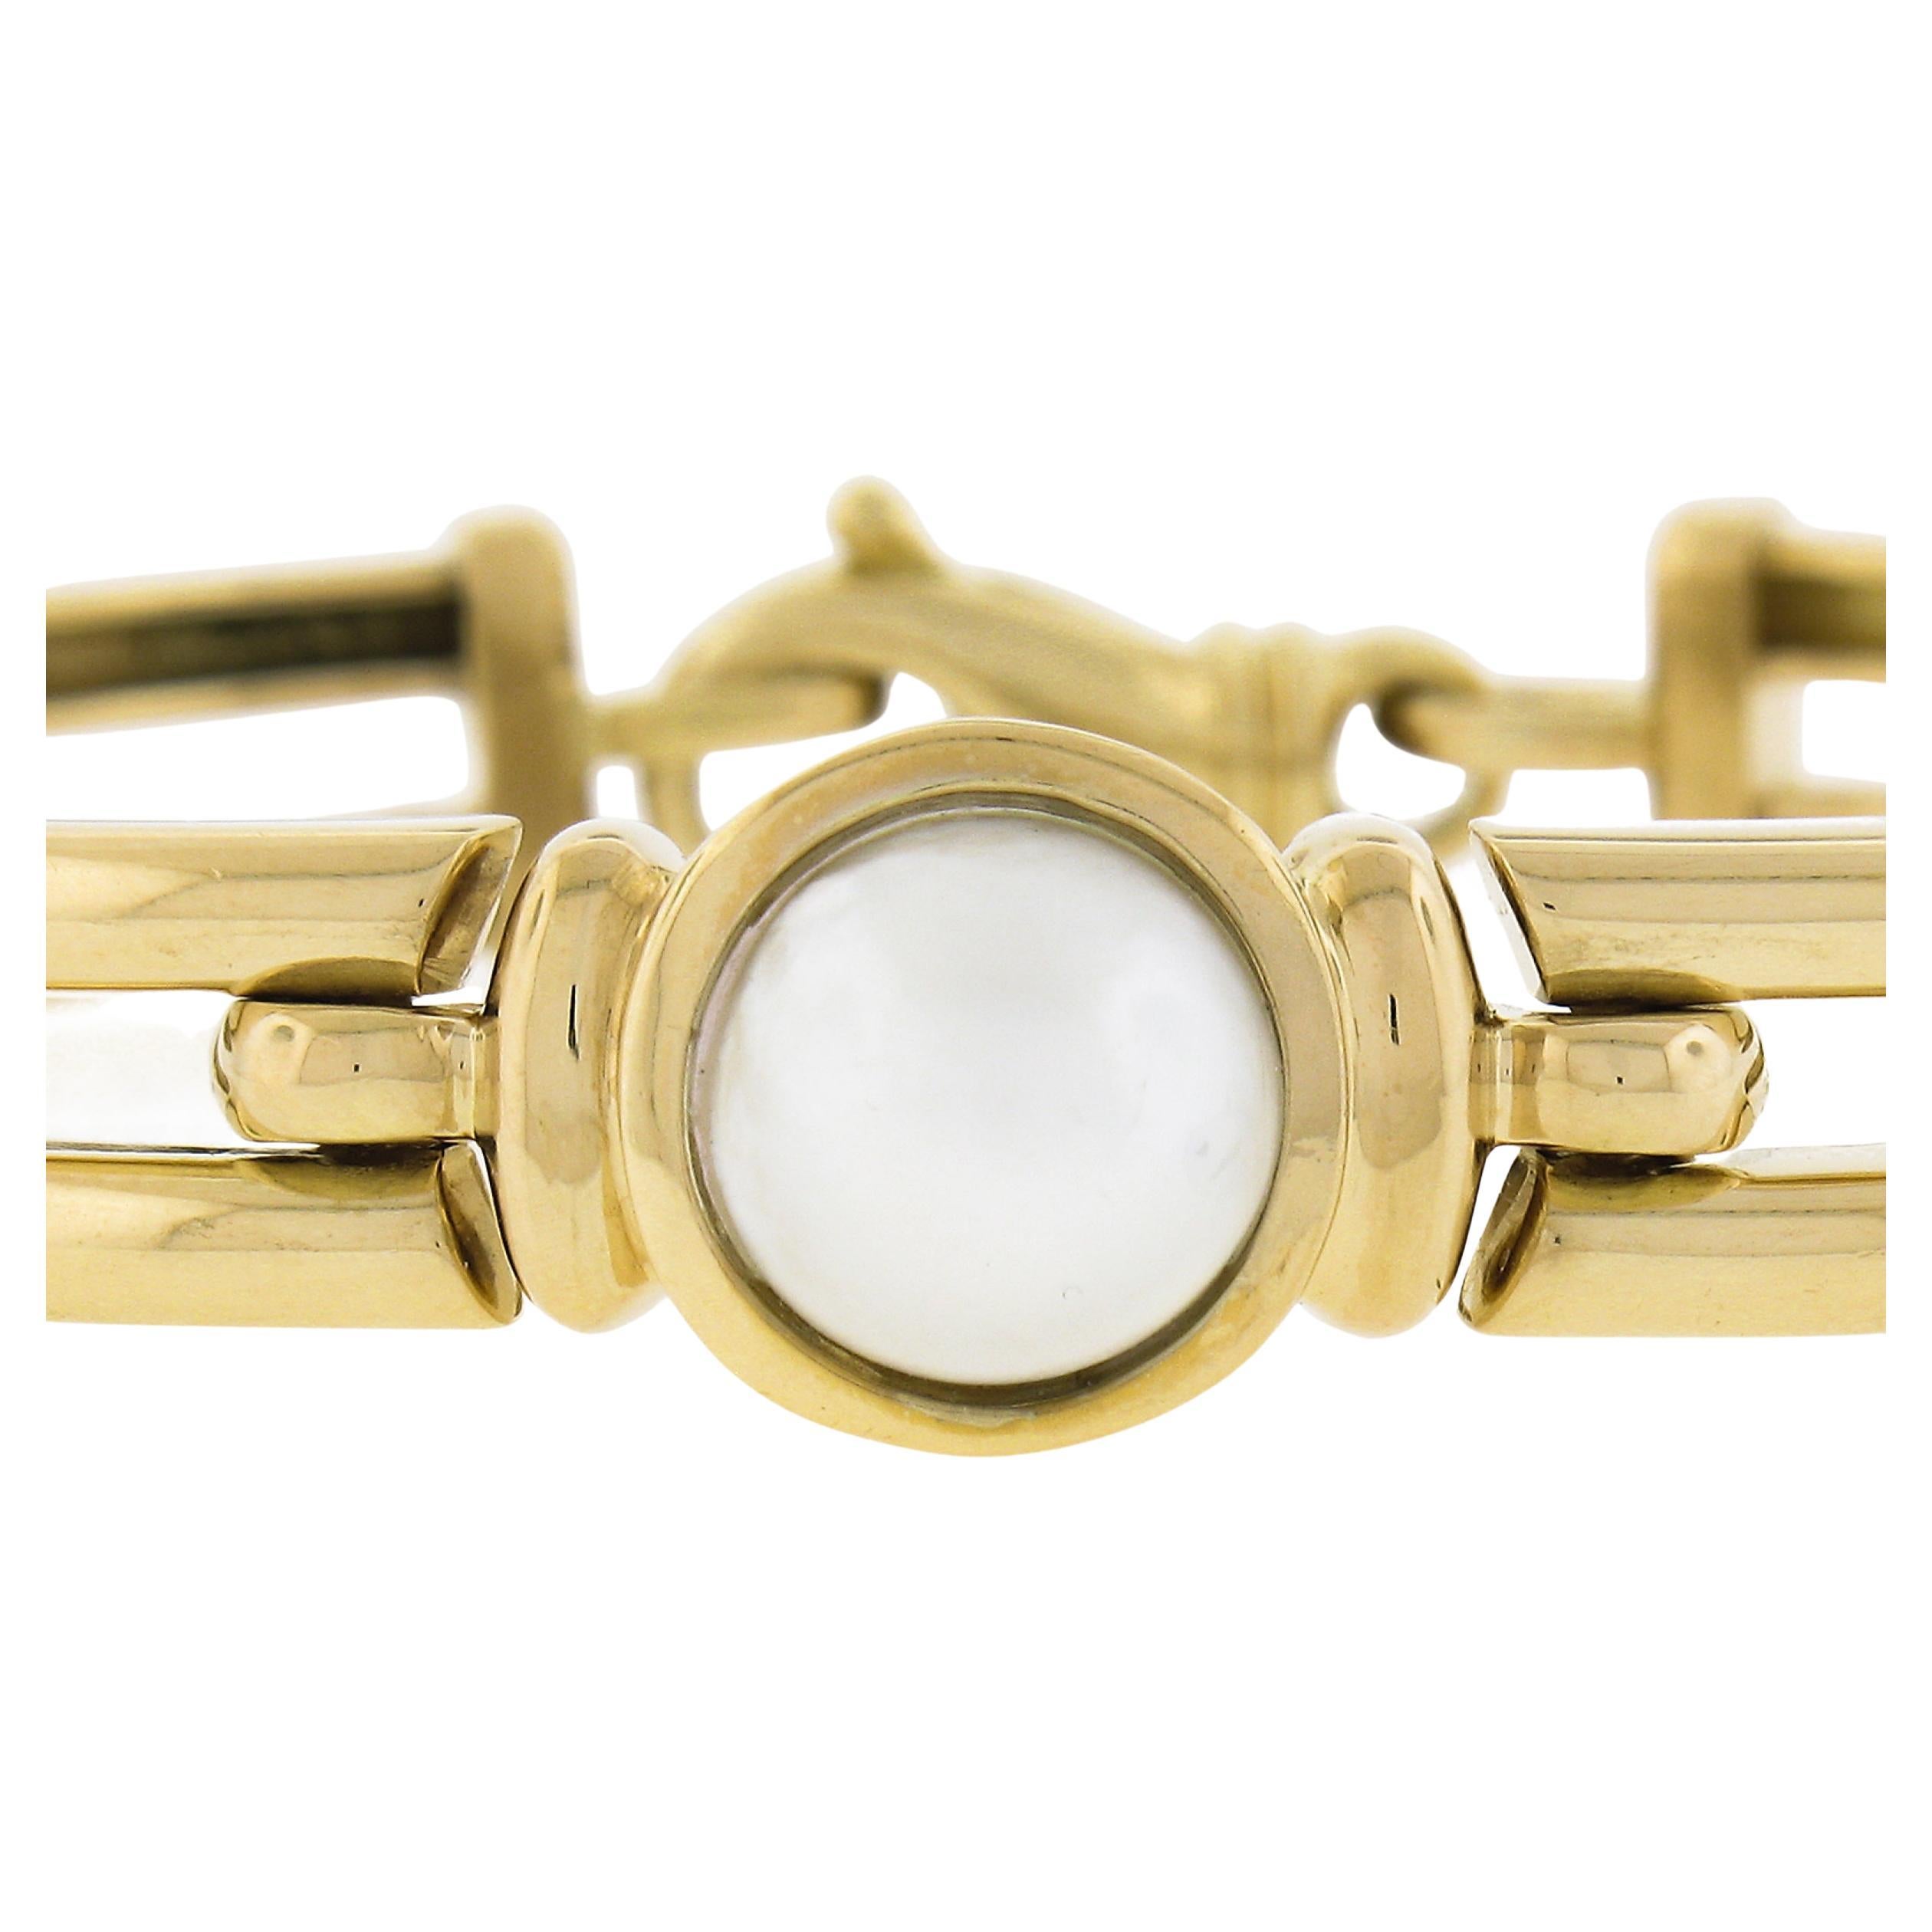 A lovely contemporary piece signed for Movado and crafted in solid 18k gold. Hefty and has some nice weight to it. Dual hinged gold wires with a bezel set white mabe pearl centerpiece that is a classic design from the Harmony collection by Movado.